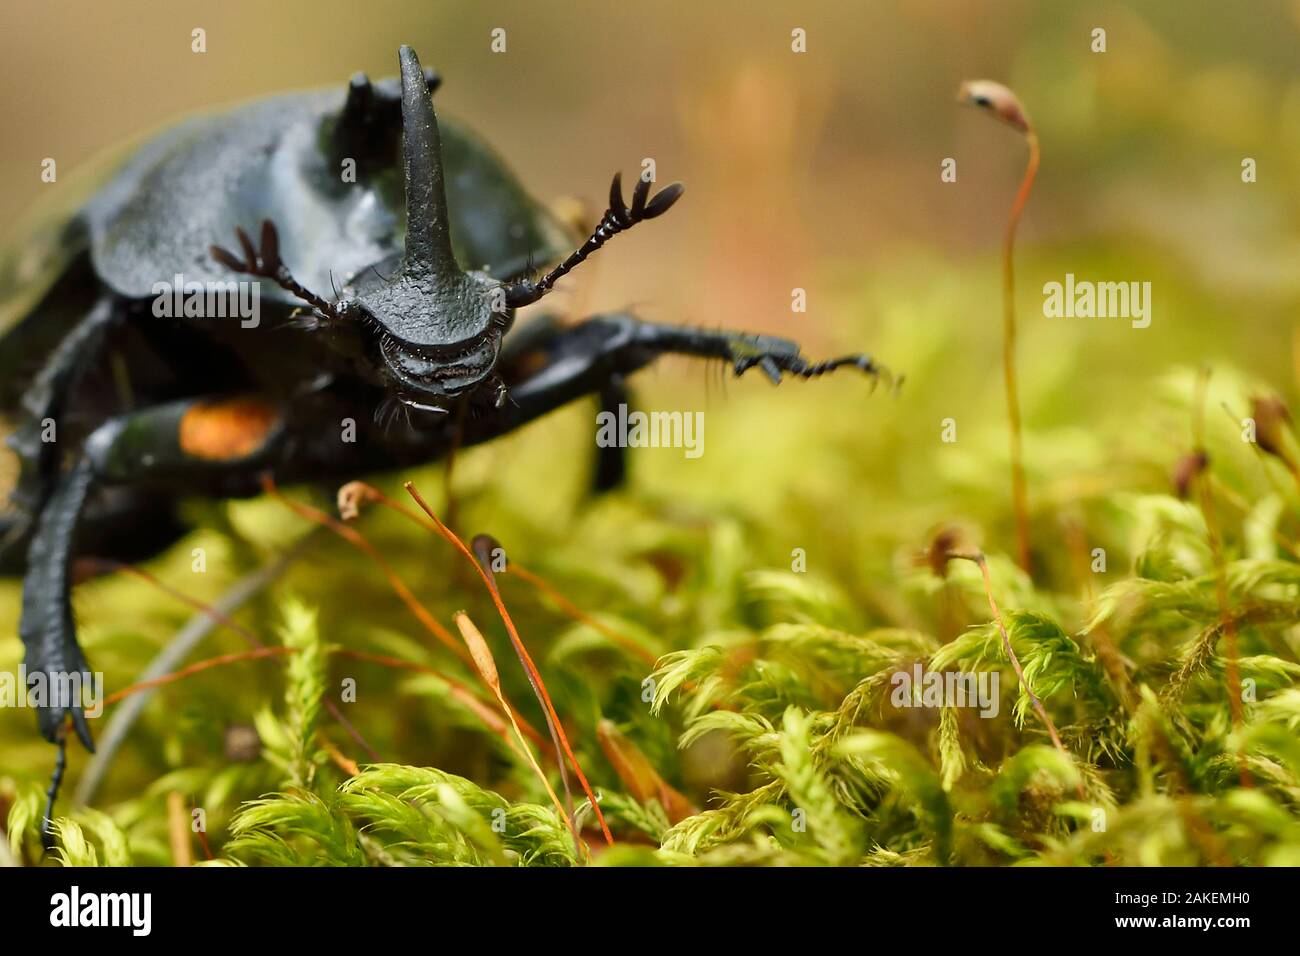 Rhinoceros beetle, (Oryctes sp) on a moss covered tree trunk , Tangjiahe National Nature Reserve, Sichuan Province, China Stock Photo